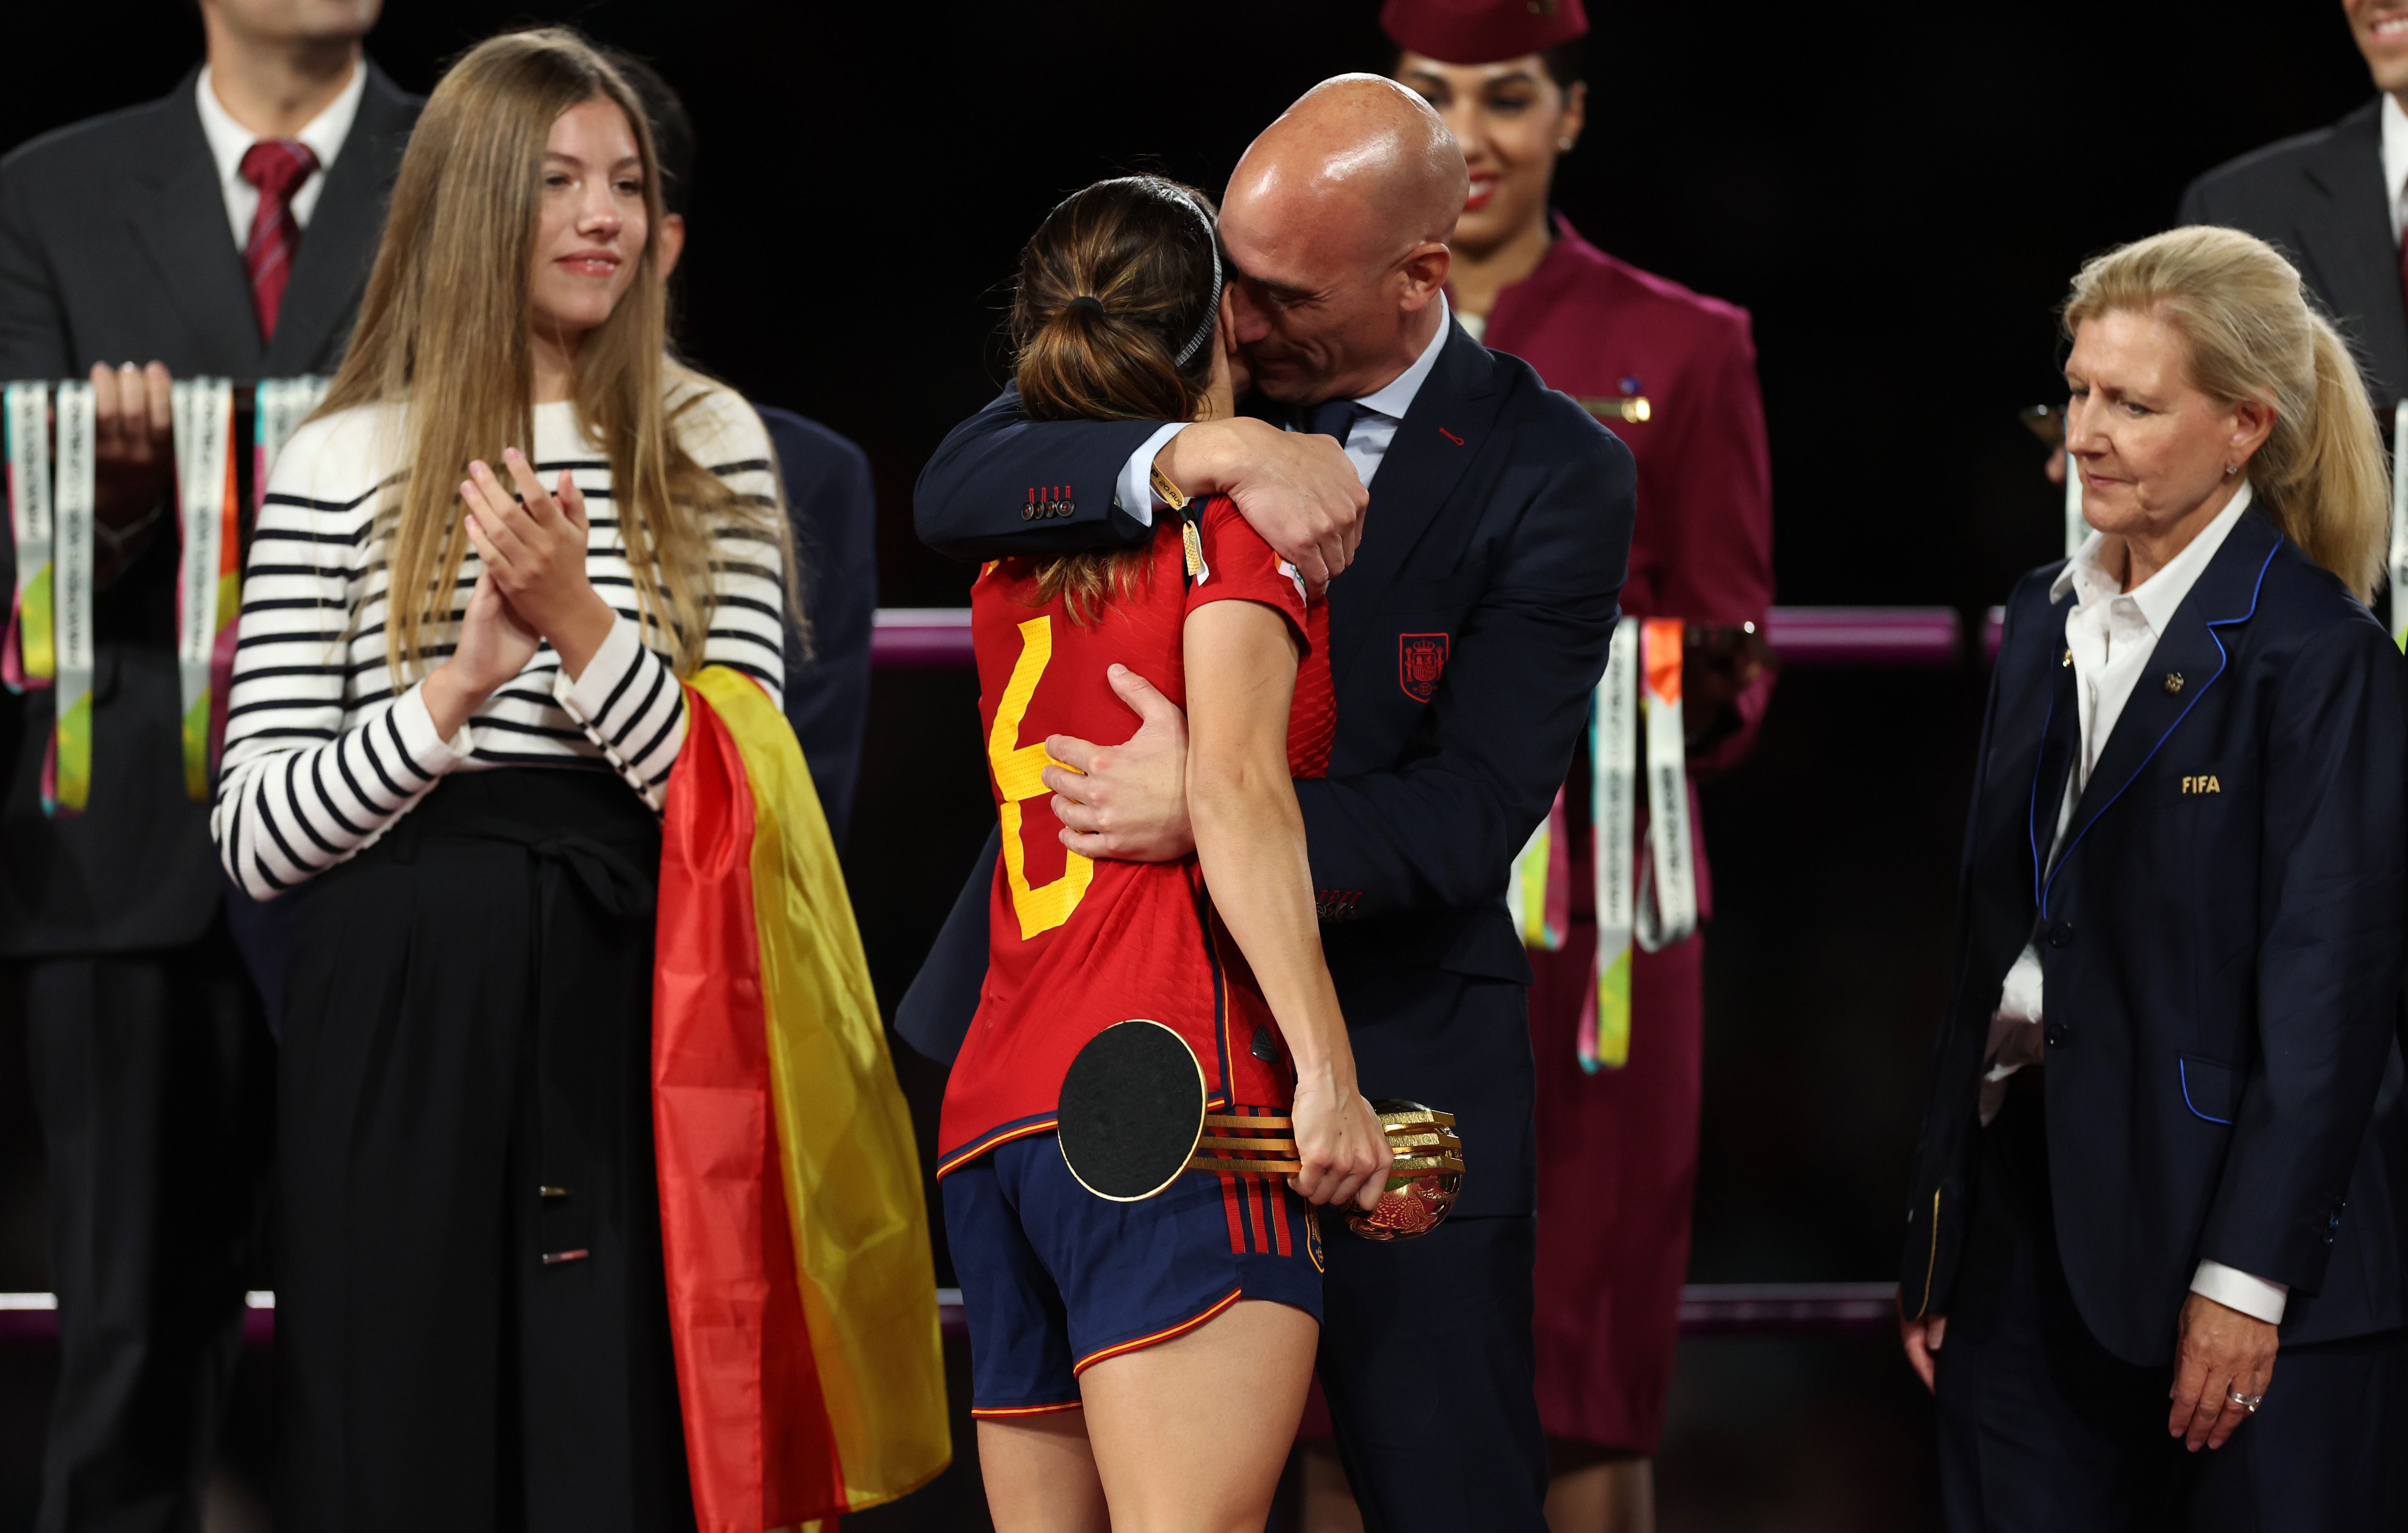 Spanish FA president Luis Rubiales apologises for kissing World Cup winner  Jenni Hermoso - Get Spanish Football News